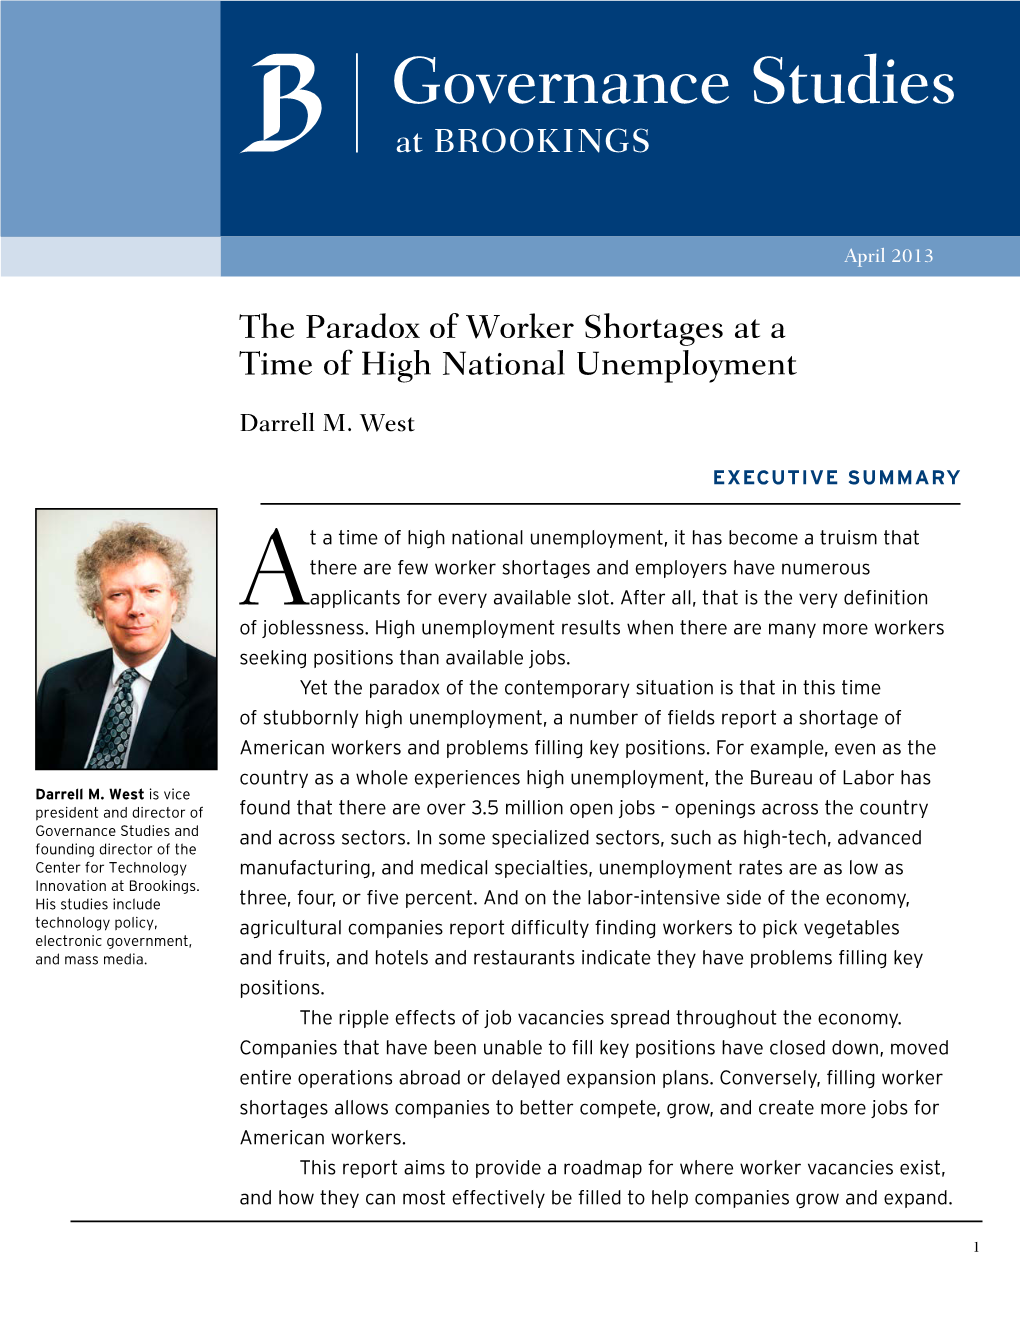 The Paradox of Worker Shortages at a Time of High National Unemployment